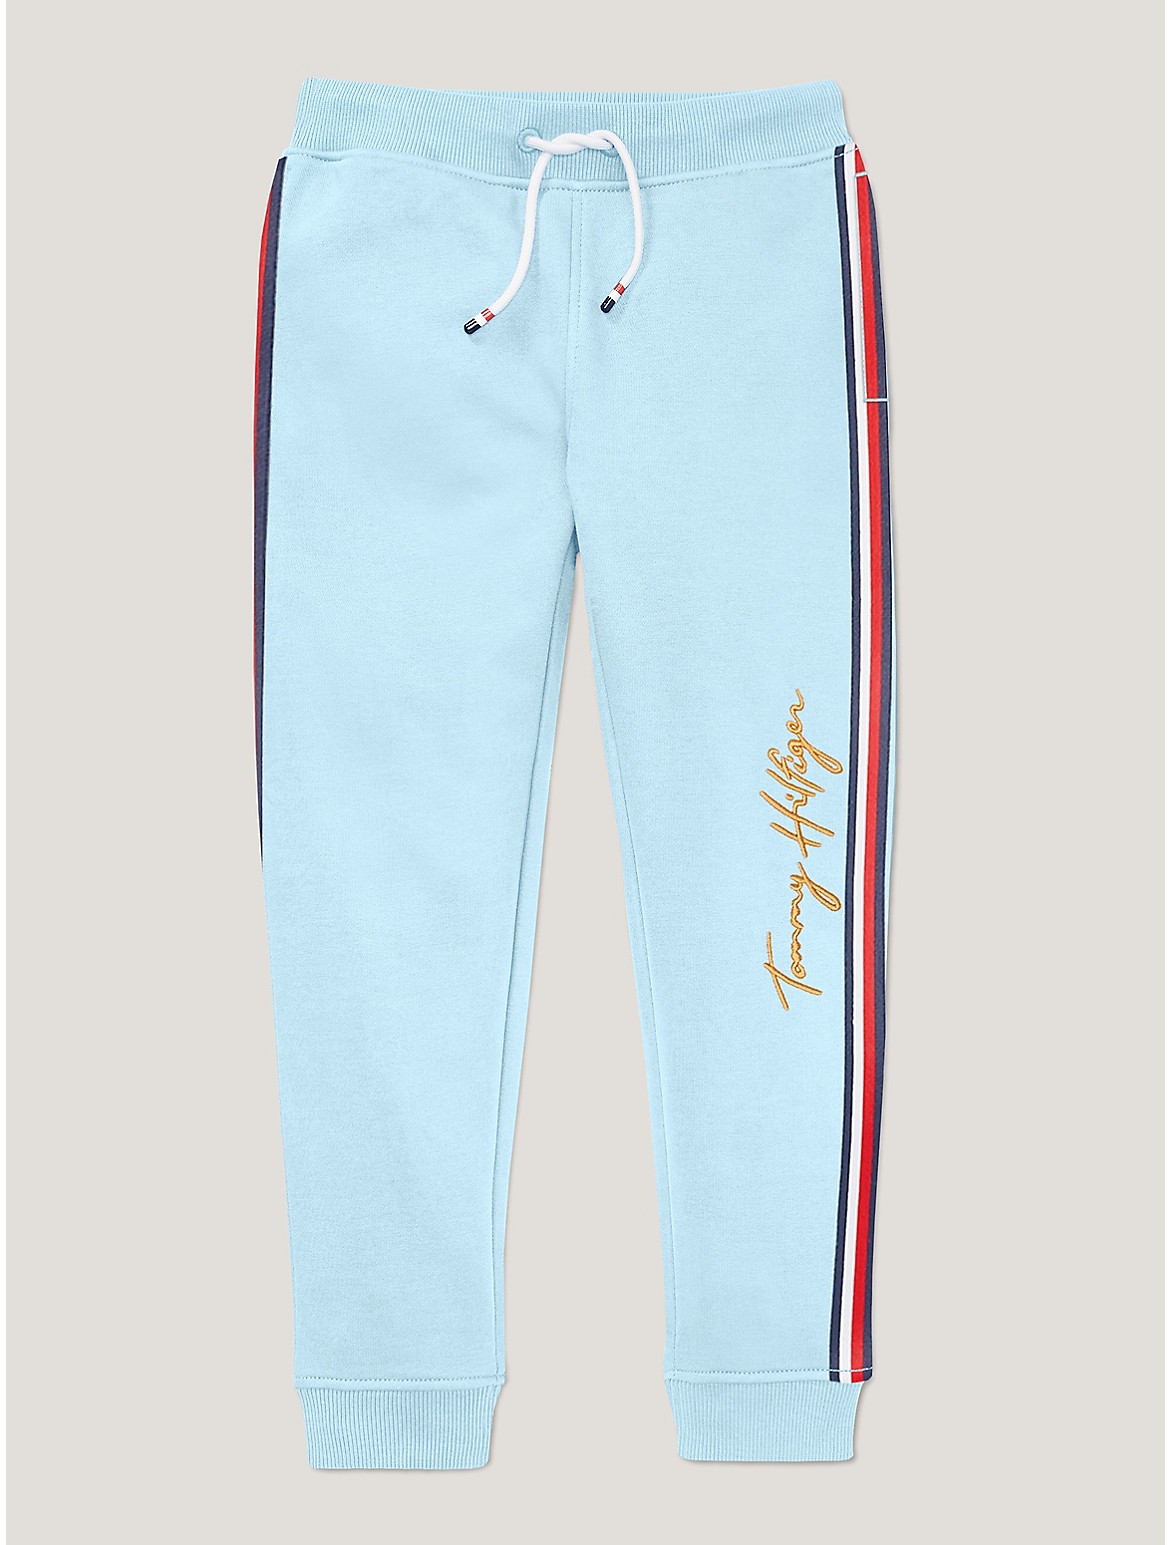 Tommy Hilfiger Boys' Kids' Embroidered Signature Jogger - Blue - XL